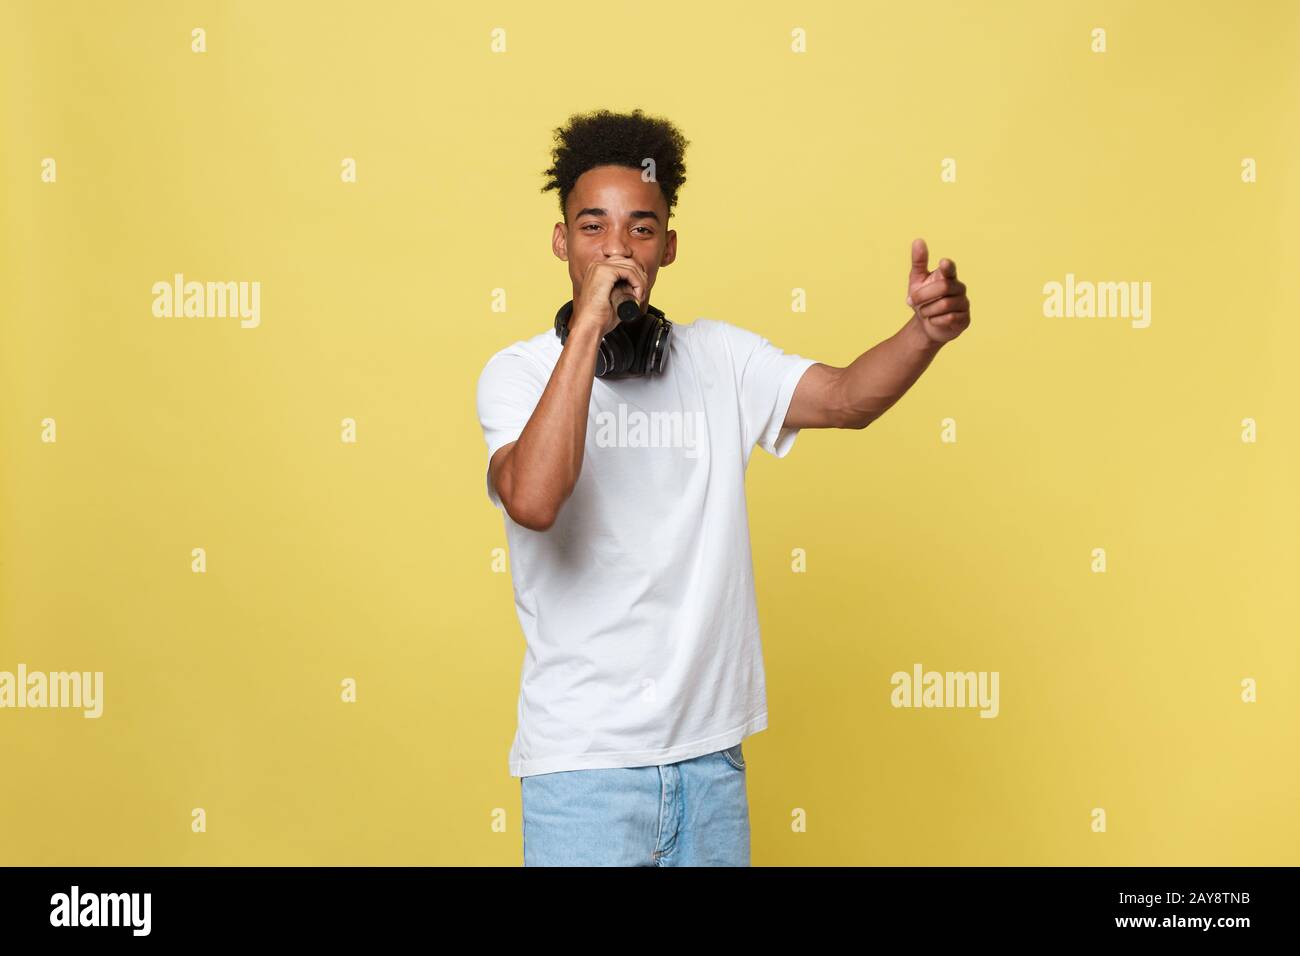 Attractive young dark-skinned man with afro haircut in white t shirt, gesticulating with hands and microphone, dancing and singi Stock Photo